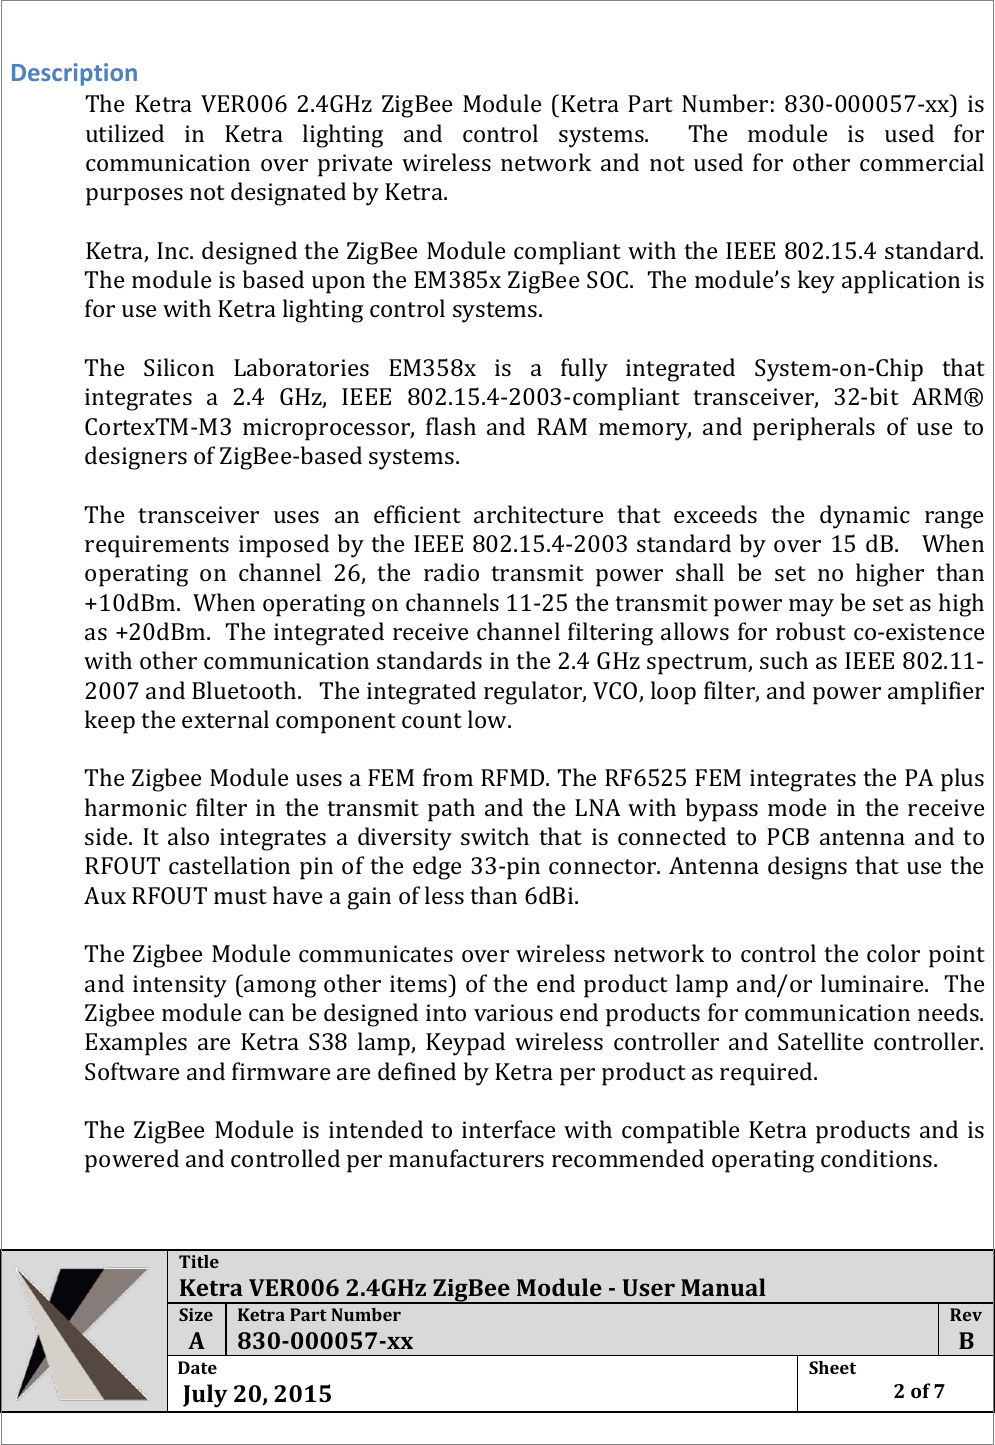  Title Ketra VER006 2.4GHz ZigBee Module - User Manual Size  A Ketra Part Number 830-000057-xx Rev  B Date   July 20, 2015 Sheet    2 of 7   Description The Ketra VER006  2.4GHz  ZigBee Module (Ketra Part Number: 830-000057-xx) is utilized in Ketra lighting and control systems.  The module is used for communication over private wireless network and not used for other commercial purposes not designated by Ketra.   Ketra, Inc. designed the ZigBee Module compliant with the IEEE 802.15.4 standard.   The module is based upon the EM385x ZigBee SOC.  The module’s key application is for use with Ketra lighting control systems.     The  Silicon Laboratories EM358x is a fully integrated System-on-Chip that integrates a 2.4 GHz, IEEE 802.15.4-2003-compliant transceiver, 32-bit ARM® CortexTM-M3 microprocessor, flash and RAM memory, and peripherals of use to designers of ZigBee-based systems.  The transceiver uses an efficient architecture that exceeds the dynamic range requirements imposed by the IEEE 802.15.4-2003 standard by over 15 dB.   When operating on channel 26, the radio transmit power shall be set no higher than +10dBm.  When operating on channels 11-25 the transmit power may be set as high as +20dBm.  The integrated receive channel filtering allows for robust co-existence with other communication standards in the 2.4 GHz spectrum, such as IEEE 802.11-2007 and Bluetooth.   The integrated regulator, VCO, loop filter, and power amplifier keep the external component count low.     The Zigbee Module uses a FEM from RFMD. The RF6525 FEM integrates the PA plus harmonic filter in the transmit path and the LNA with bypass mode in the receive side. It also integrates a diversity switch that is connected to PCB antenna and to RFOUT castellation pin of the edge 33-pin connector. Antenna designs that use the Aux RFOUT must have a gain of less than 6dBi.  The Zigbee Module communicates over wireless network to control the color point and intensity (among other items) of the end product lamp and/or luminaire.  The Zigbee module can be designed into various end products for communication needs.  Examples are Ketra S38 lamp, Keypad wireless controller and Satellite controller.  Software and firmware are defined by Ketra per product as required.  The ZigBee Module is intended to interface with compatible Ketra products and is powered and controlled per manufacturers recommended operating conditions.    